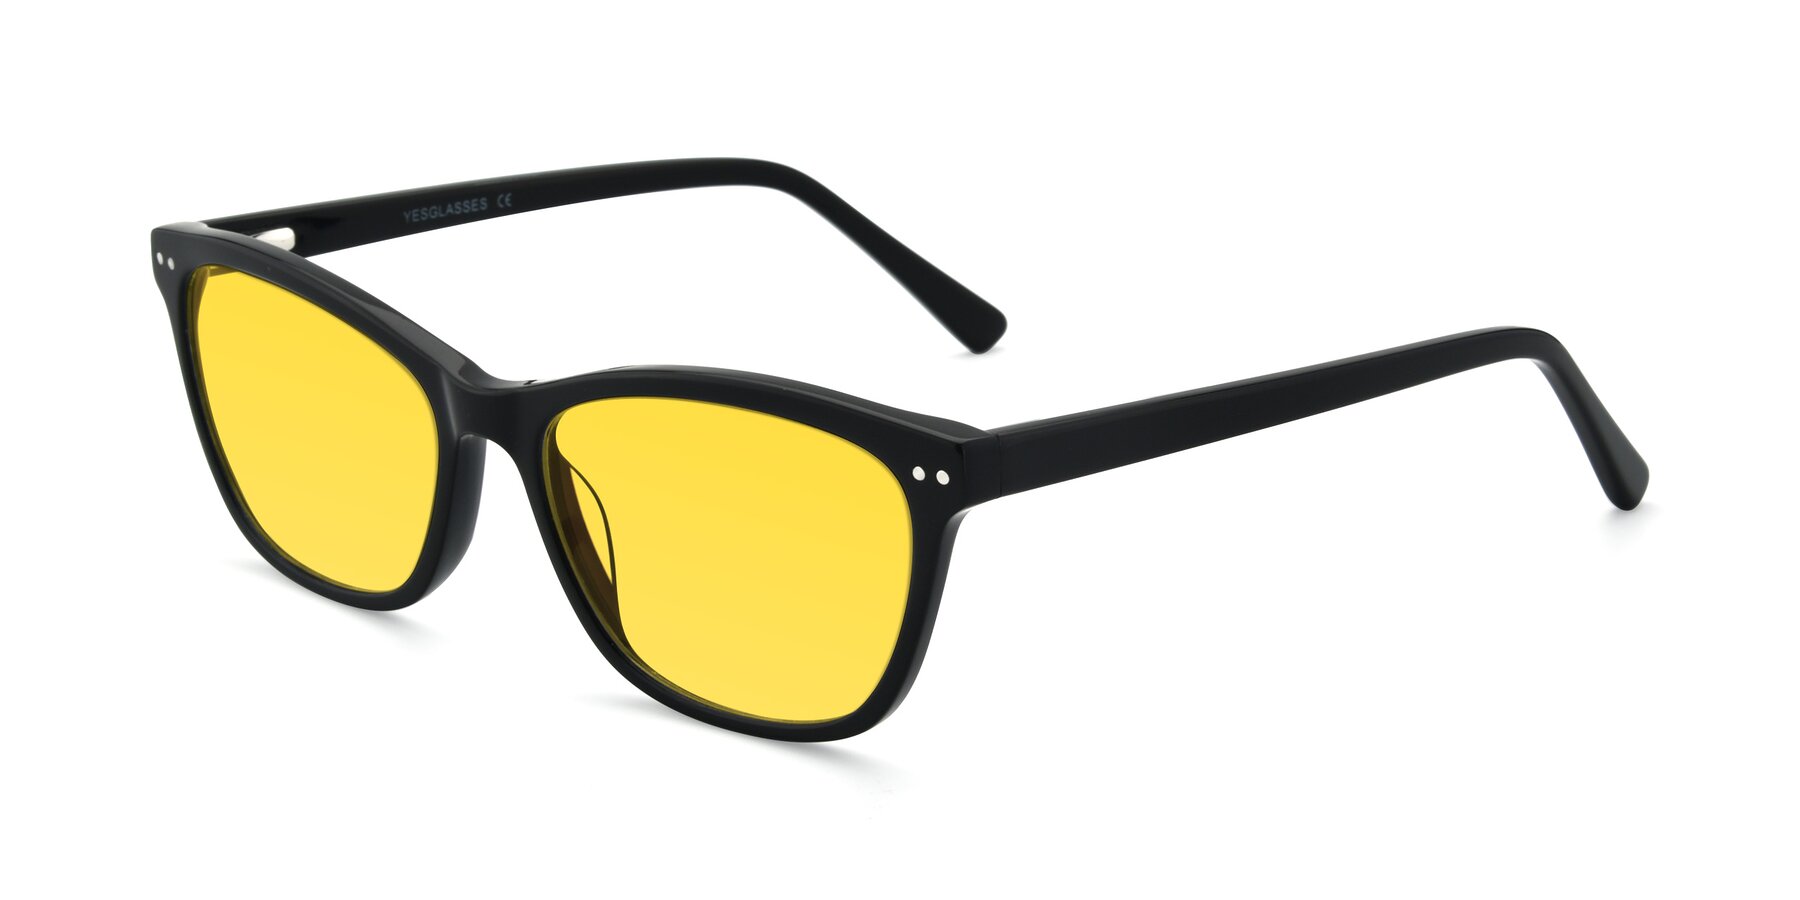 Angle of 17350 in Black with Yellow Tinted Lenses